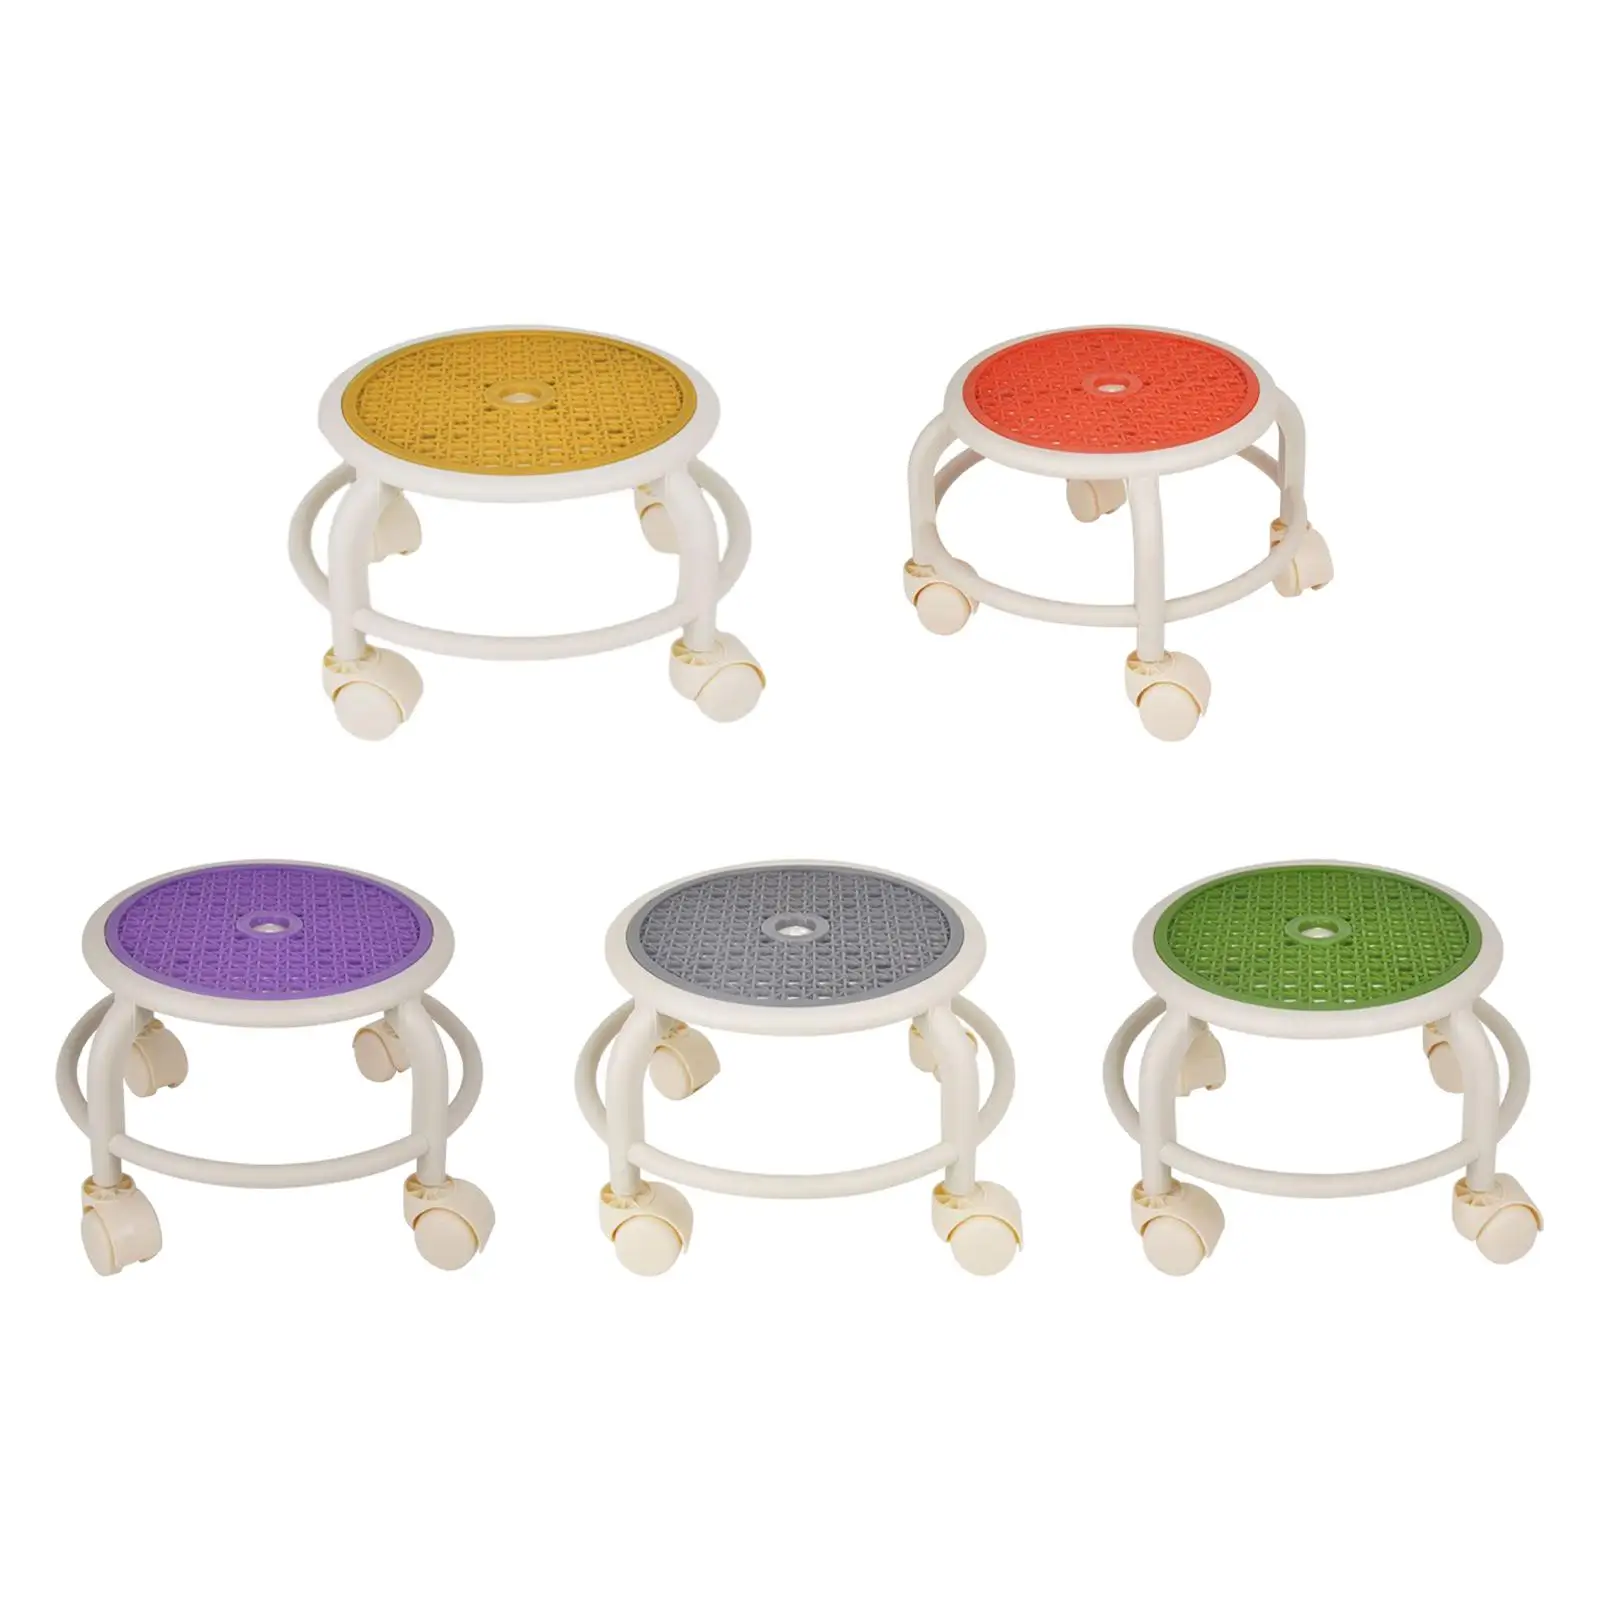 Low Roller Seat Stool Movable Mini Stool Small Sturdy Shoe Changing Stool Seat for Kids and Adult Fitness Salons Office Kitchen